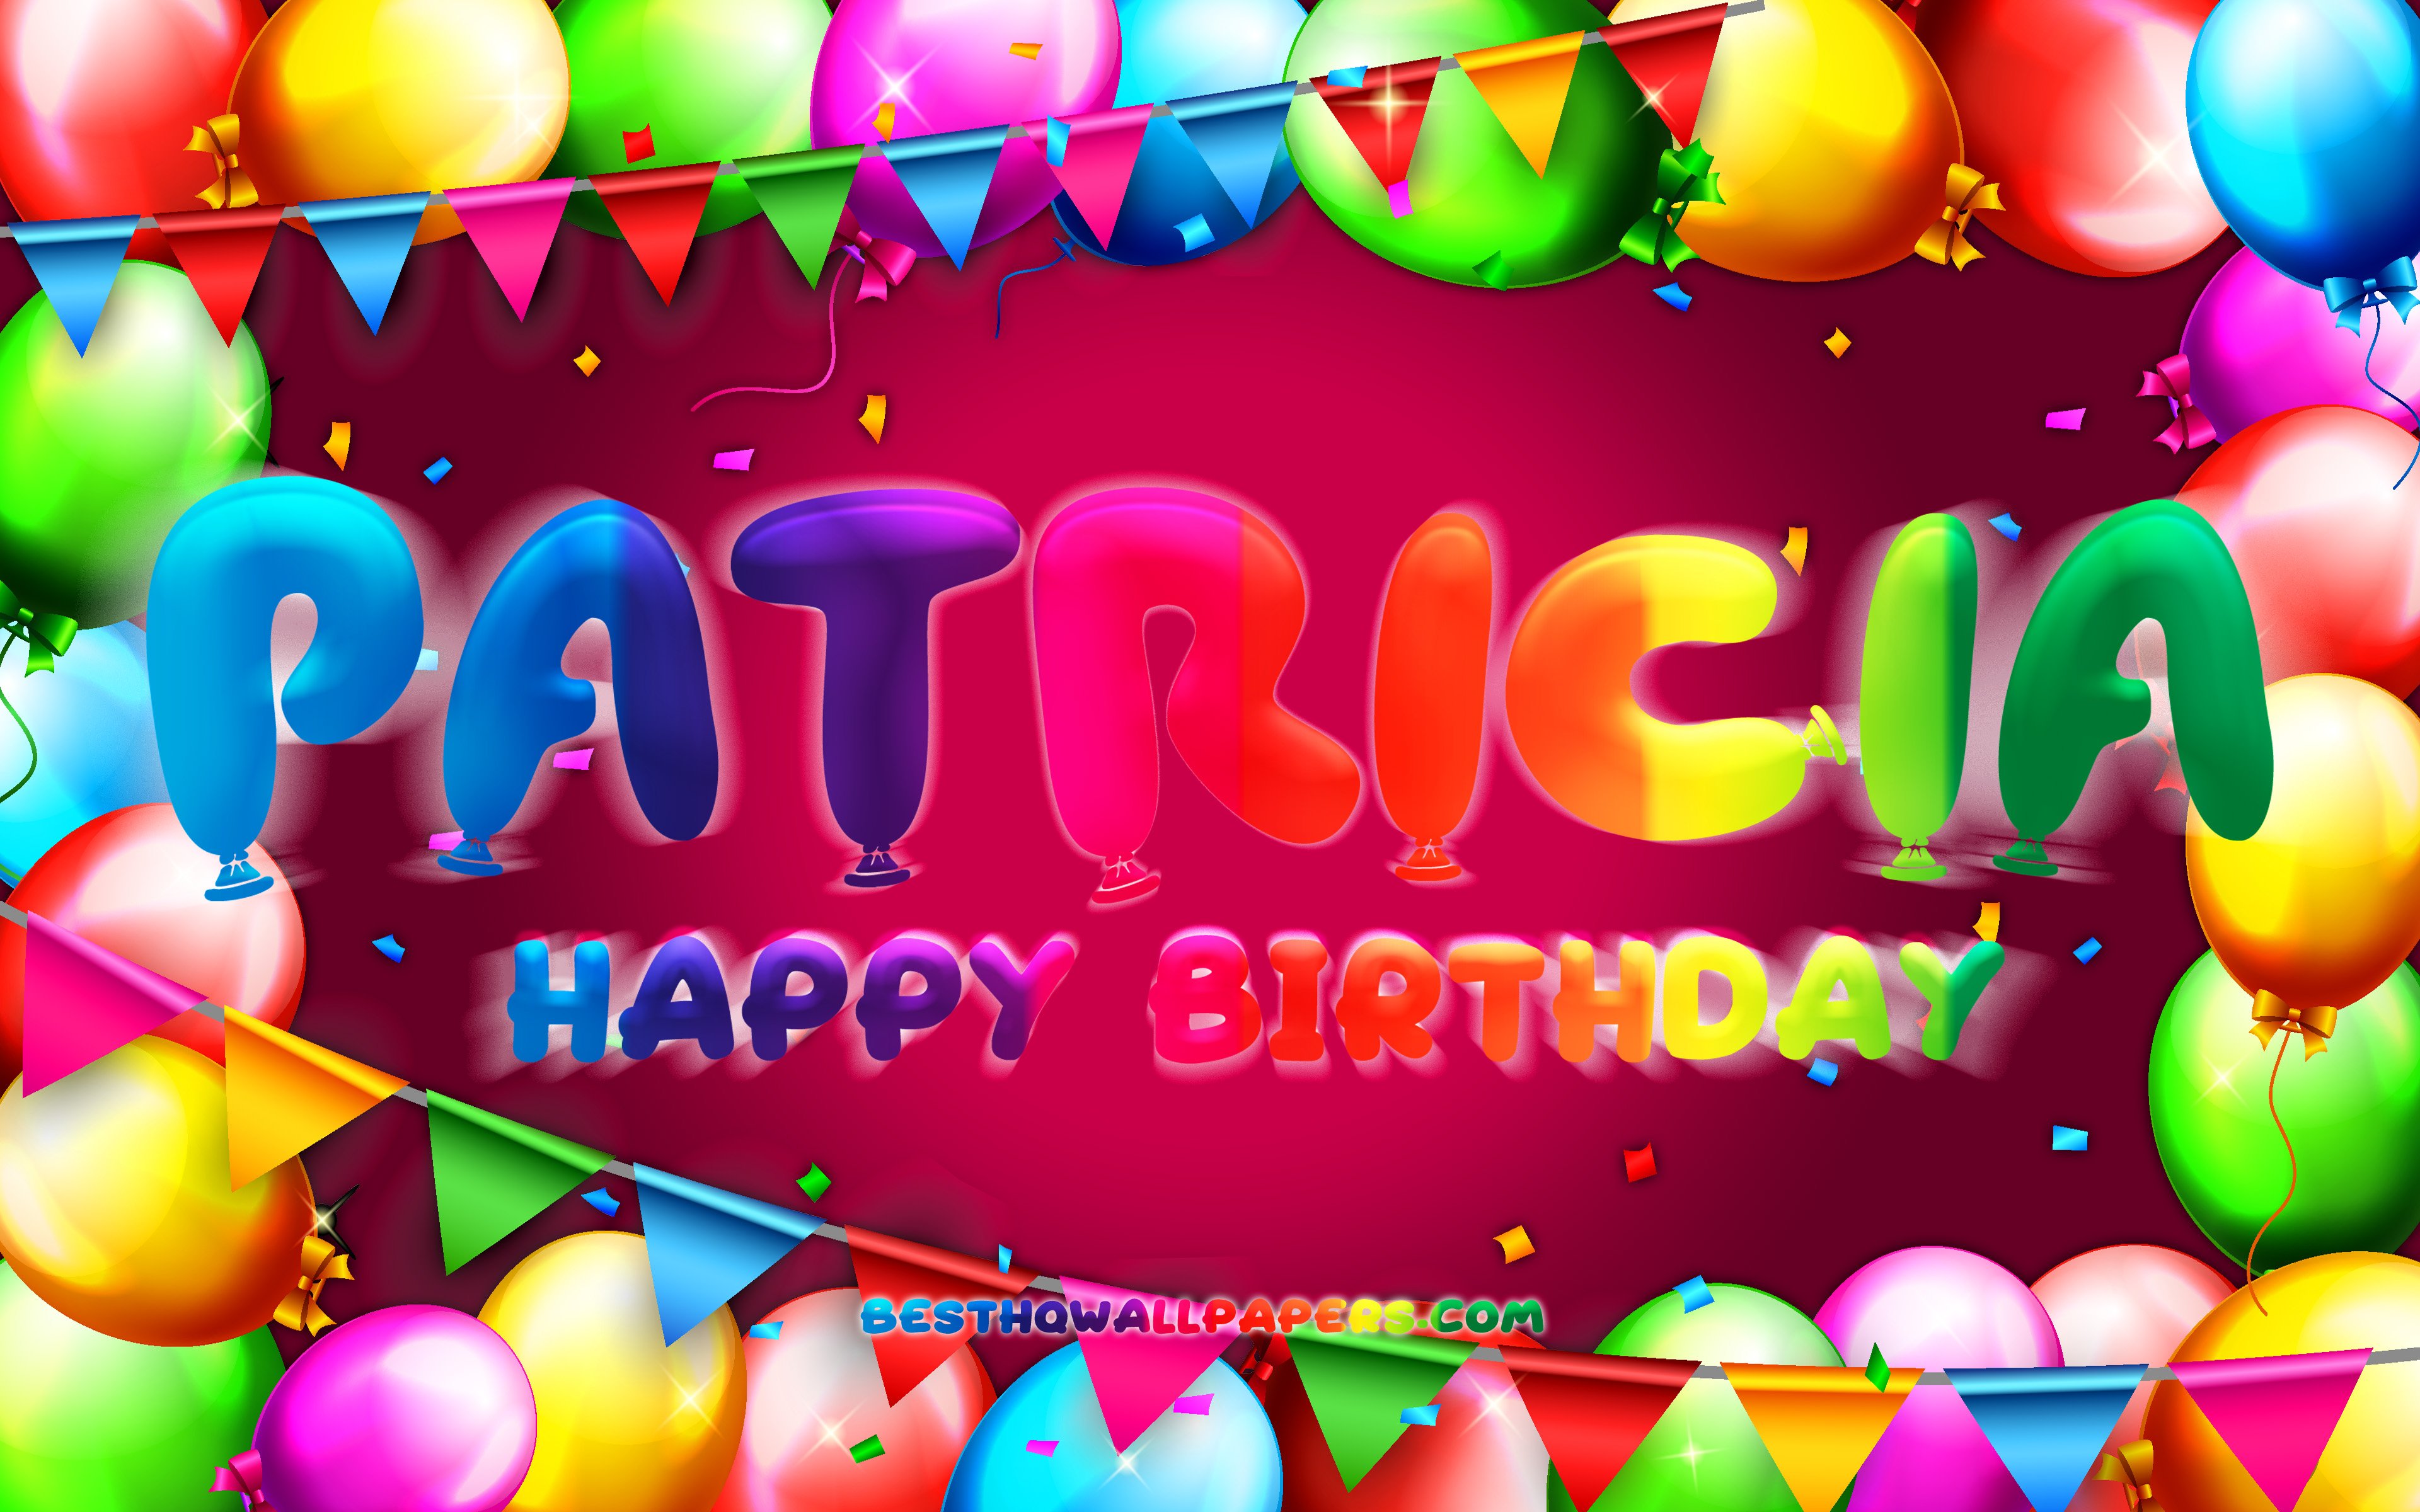 Download Wallpapers Happy Birthday Patricia 4k Colorful Balloon Frame Patricia Name Purple Background Patricia Happy Birthday Patricia Birthday Popular American Female Names Birthday Concept Patricia For Desktop With Resolution 3840x2400 High